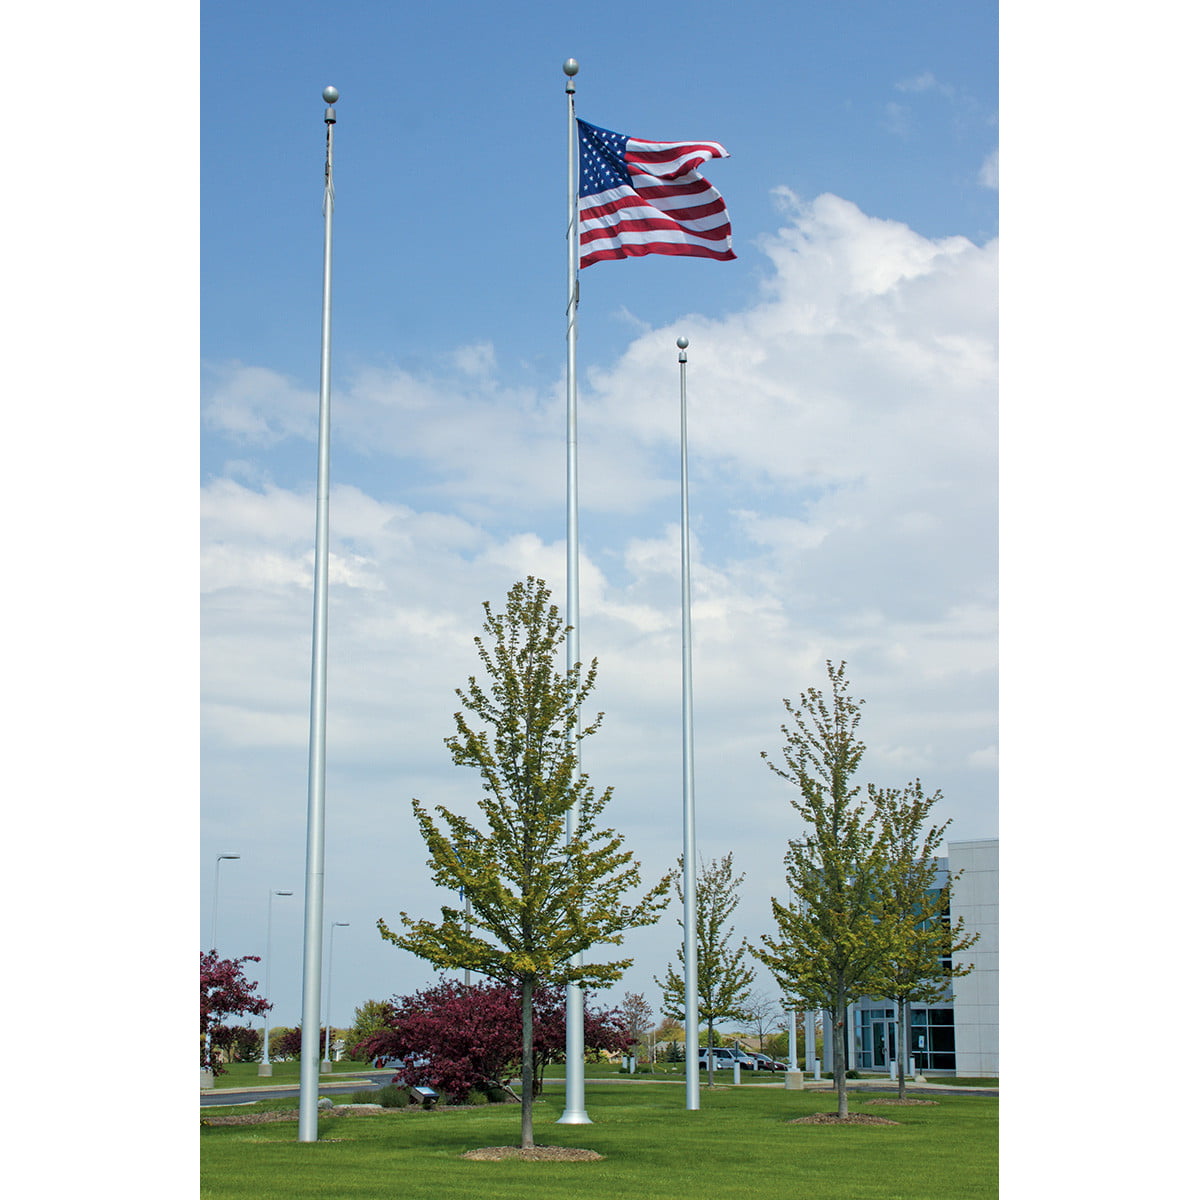 Deluxe Aluminum Flagpole - Internal Halyard with Winch System